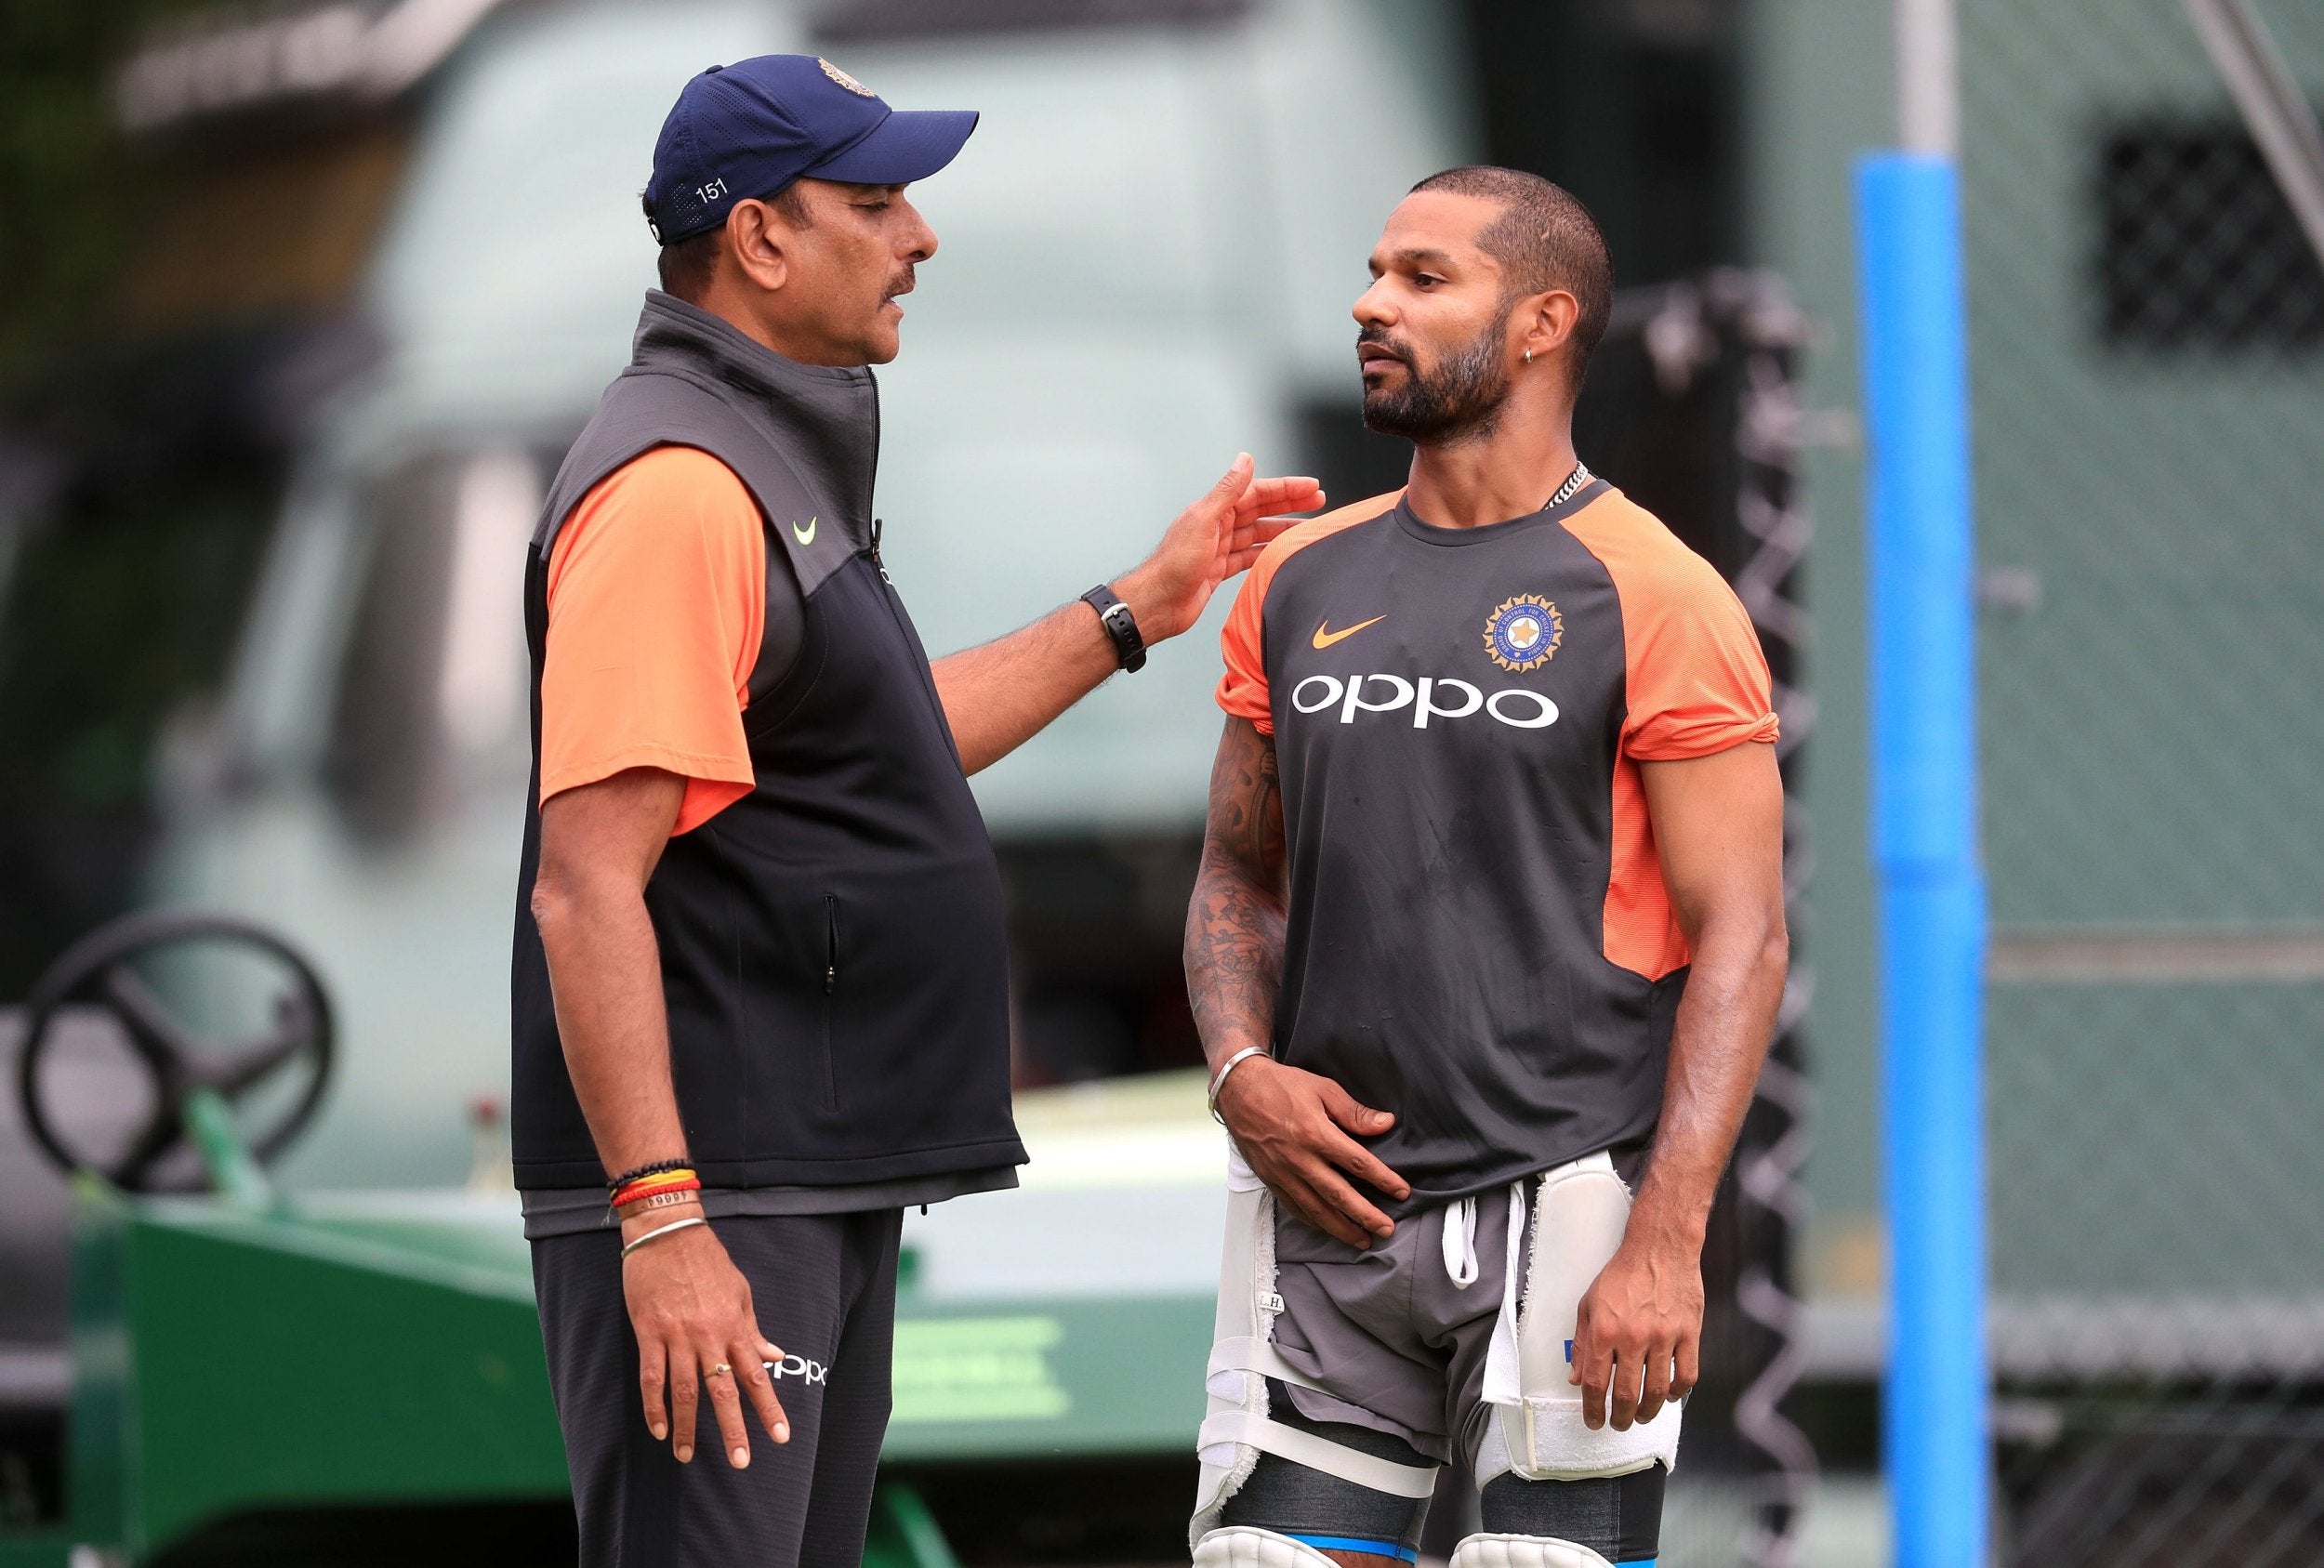 India’s top order is a concern for head coach Ravi Shastri